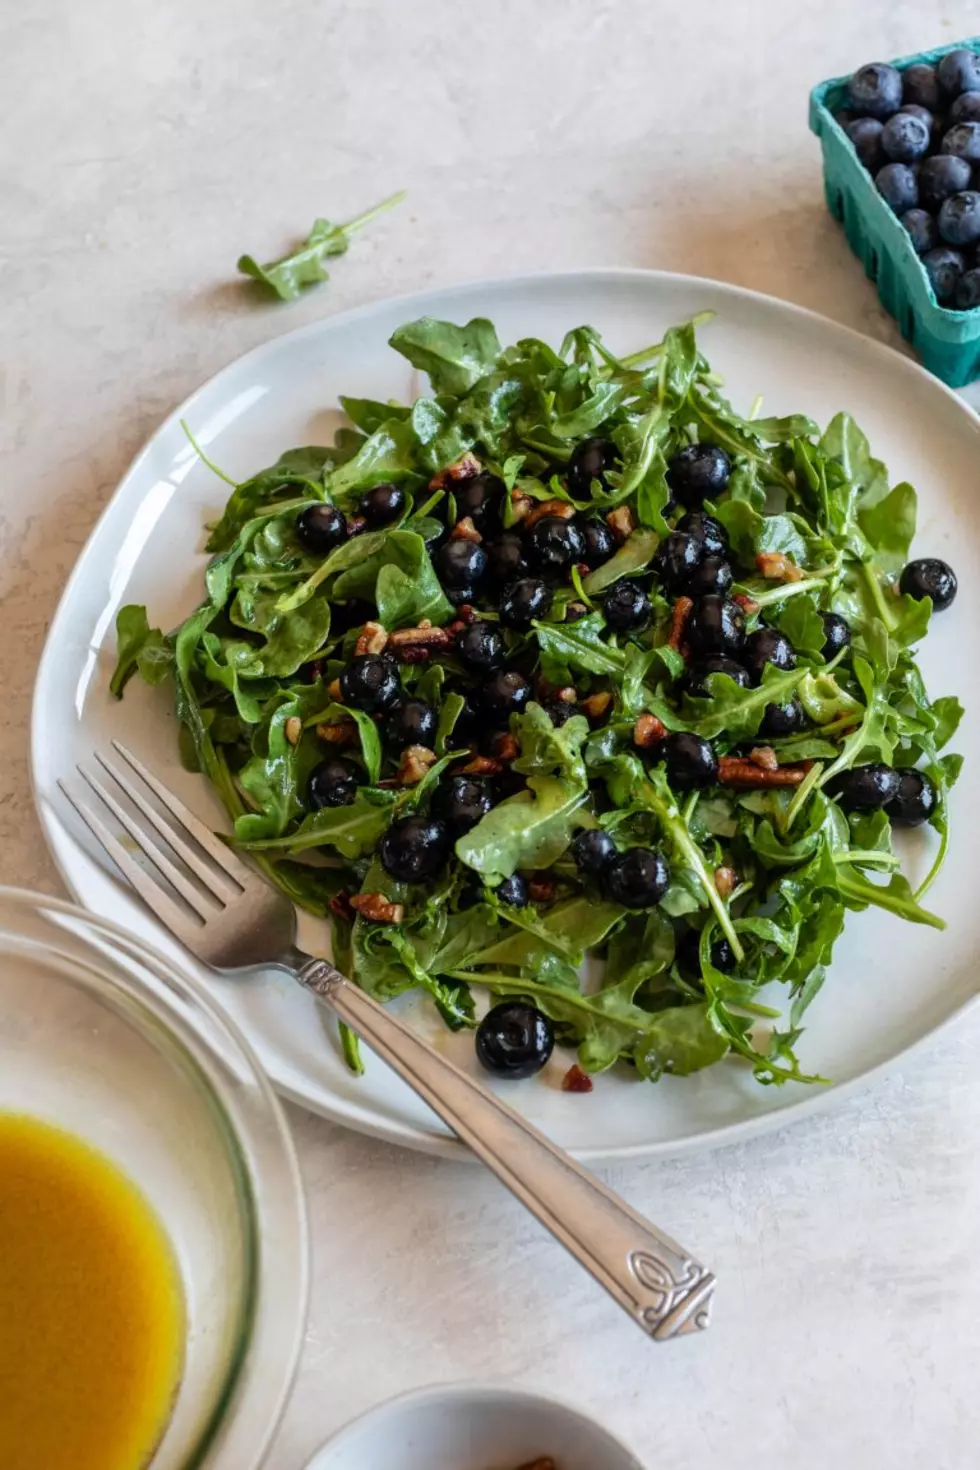 Healthy Summer Lunch: Blueberry Pecan Arugula Salad with Blueberry Vinaigrette